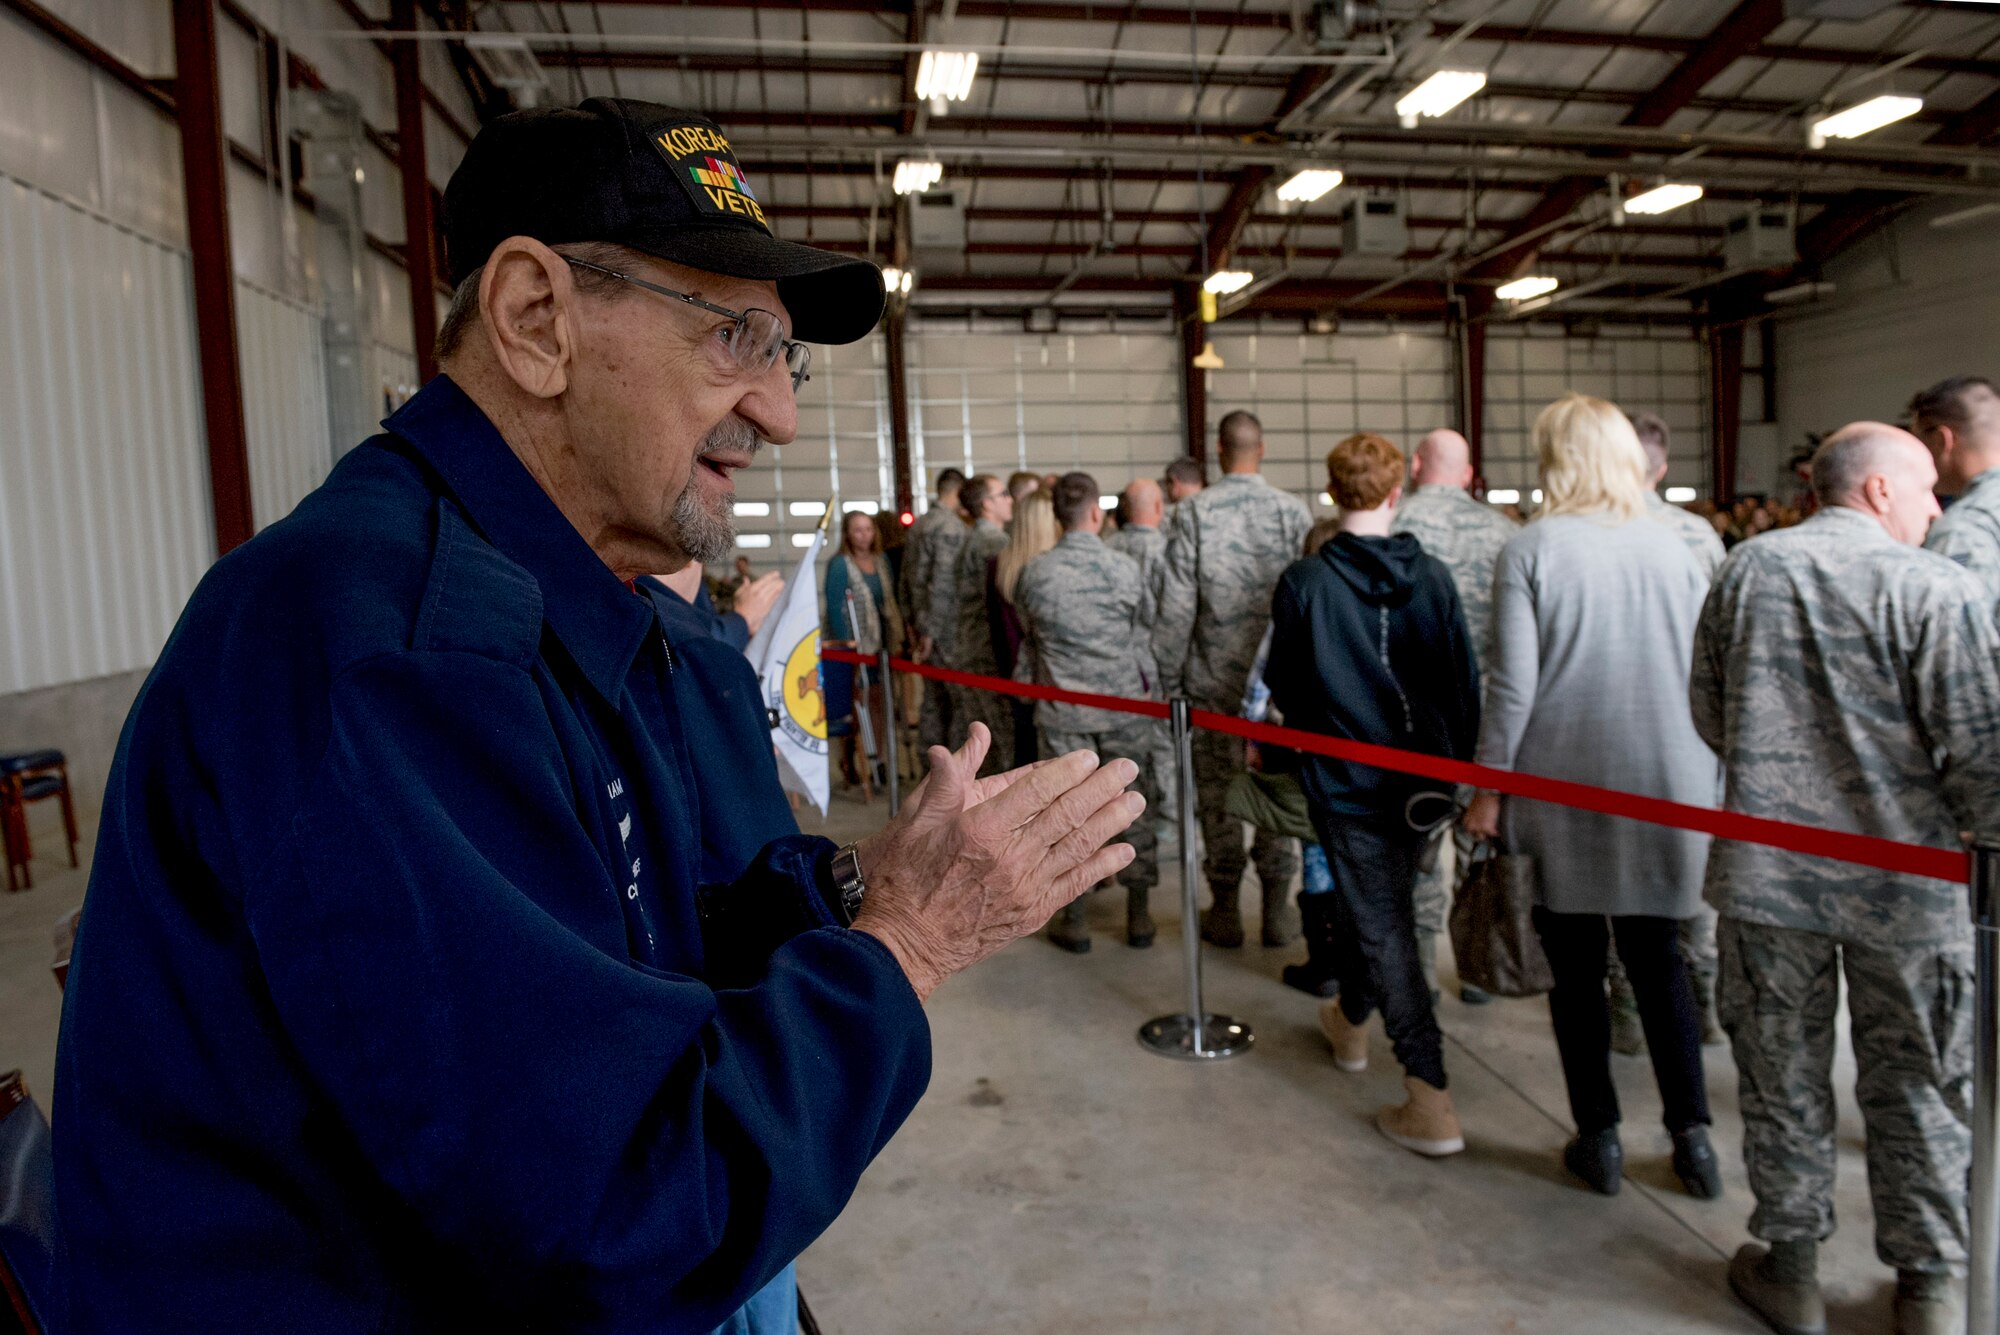 Retired Command Chief Master Sergeant George Banasky welcomes home Airmen from deployment during a ceremony at the 138th Fighter Wing in Tulsa, Okla., March 5, 2017. Banasky is a member of the Silver Beavers, a Heritage Committee made up of retired members of the 138th FW. (U.S. Air National Guard photo by Senior Airman Rebecca Imwalle)